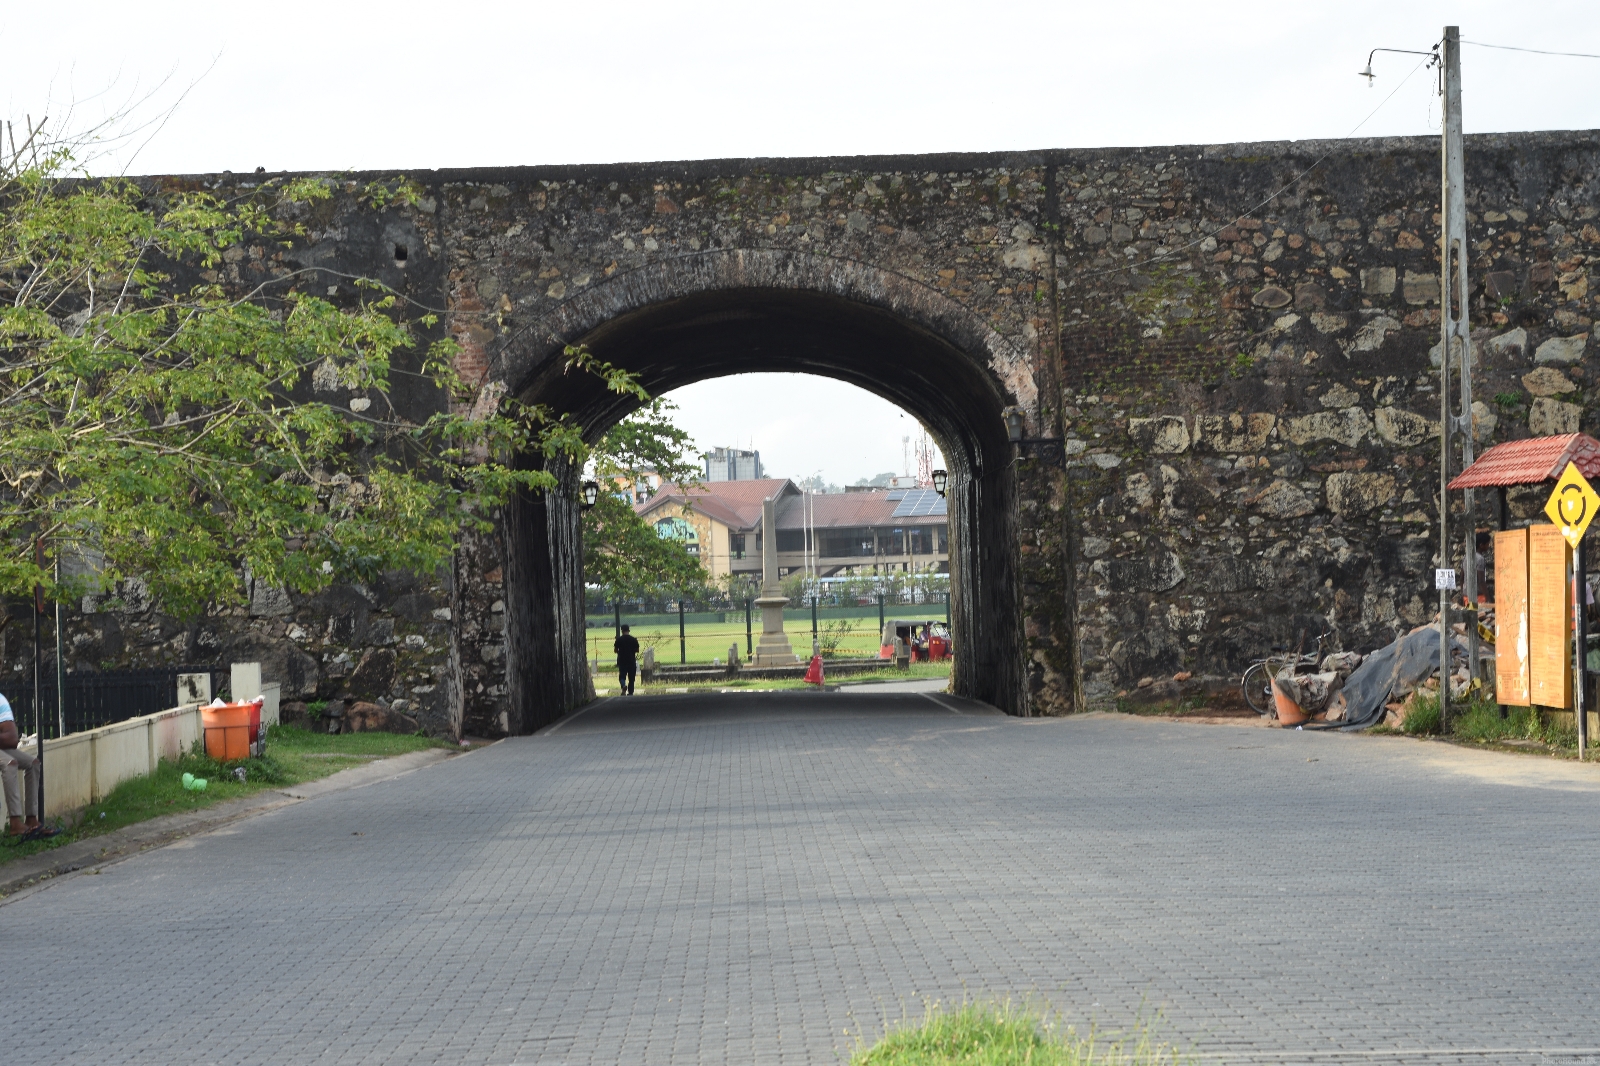 Image of Galle Fort by Abdul Zahir